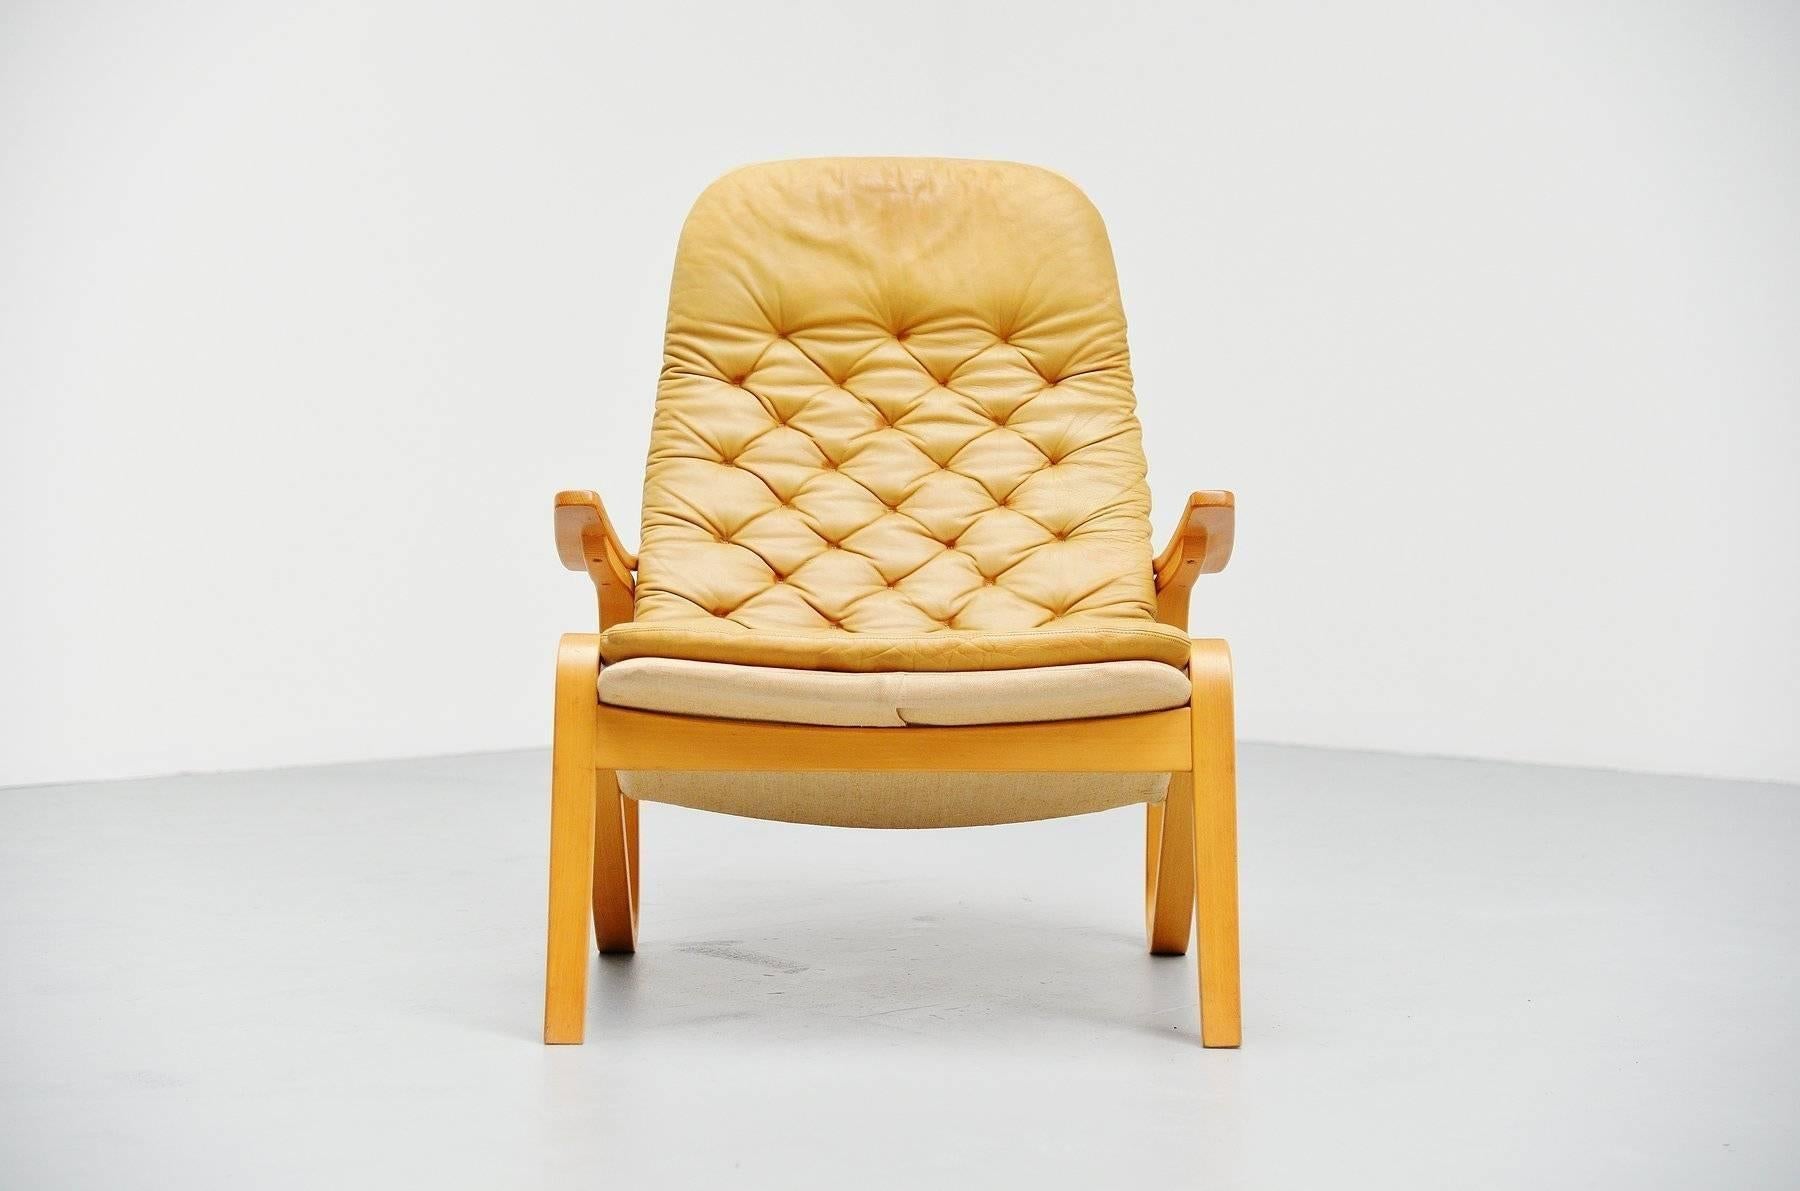 Fantastic shaped lounge chair designed by Bruno Mathsson for Dux, Sweden, 1974. I have never seen this lounge chair before and cannot find it on the internet either. It must be a very rare example. But its very nice shaped, looks like a grasshopper